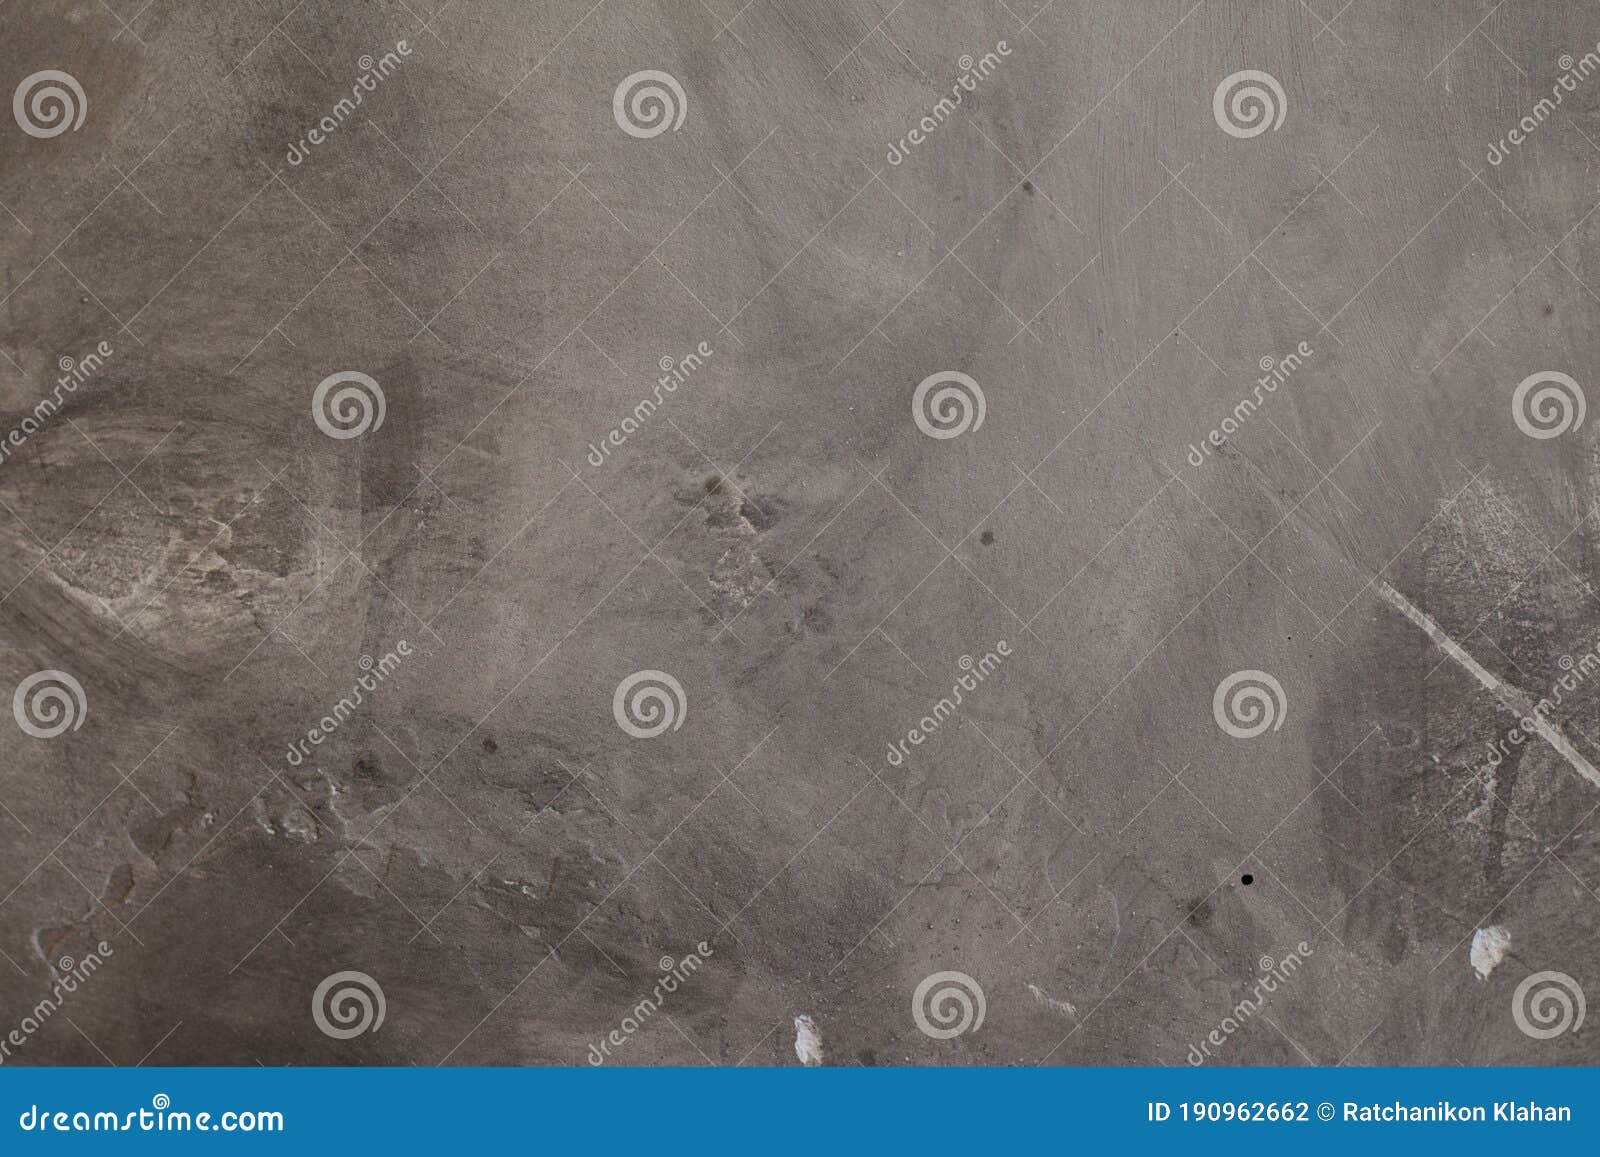 concrete texture or cement wall texture abstract background